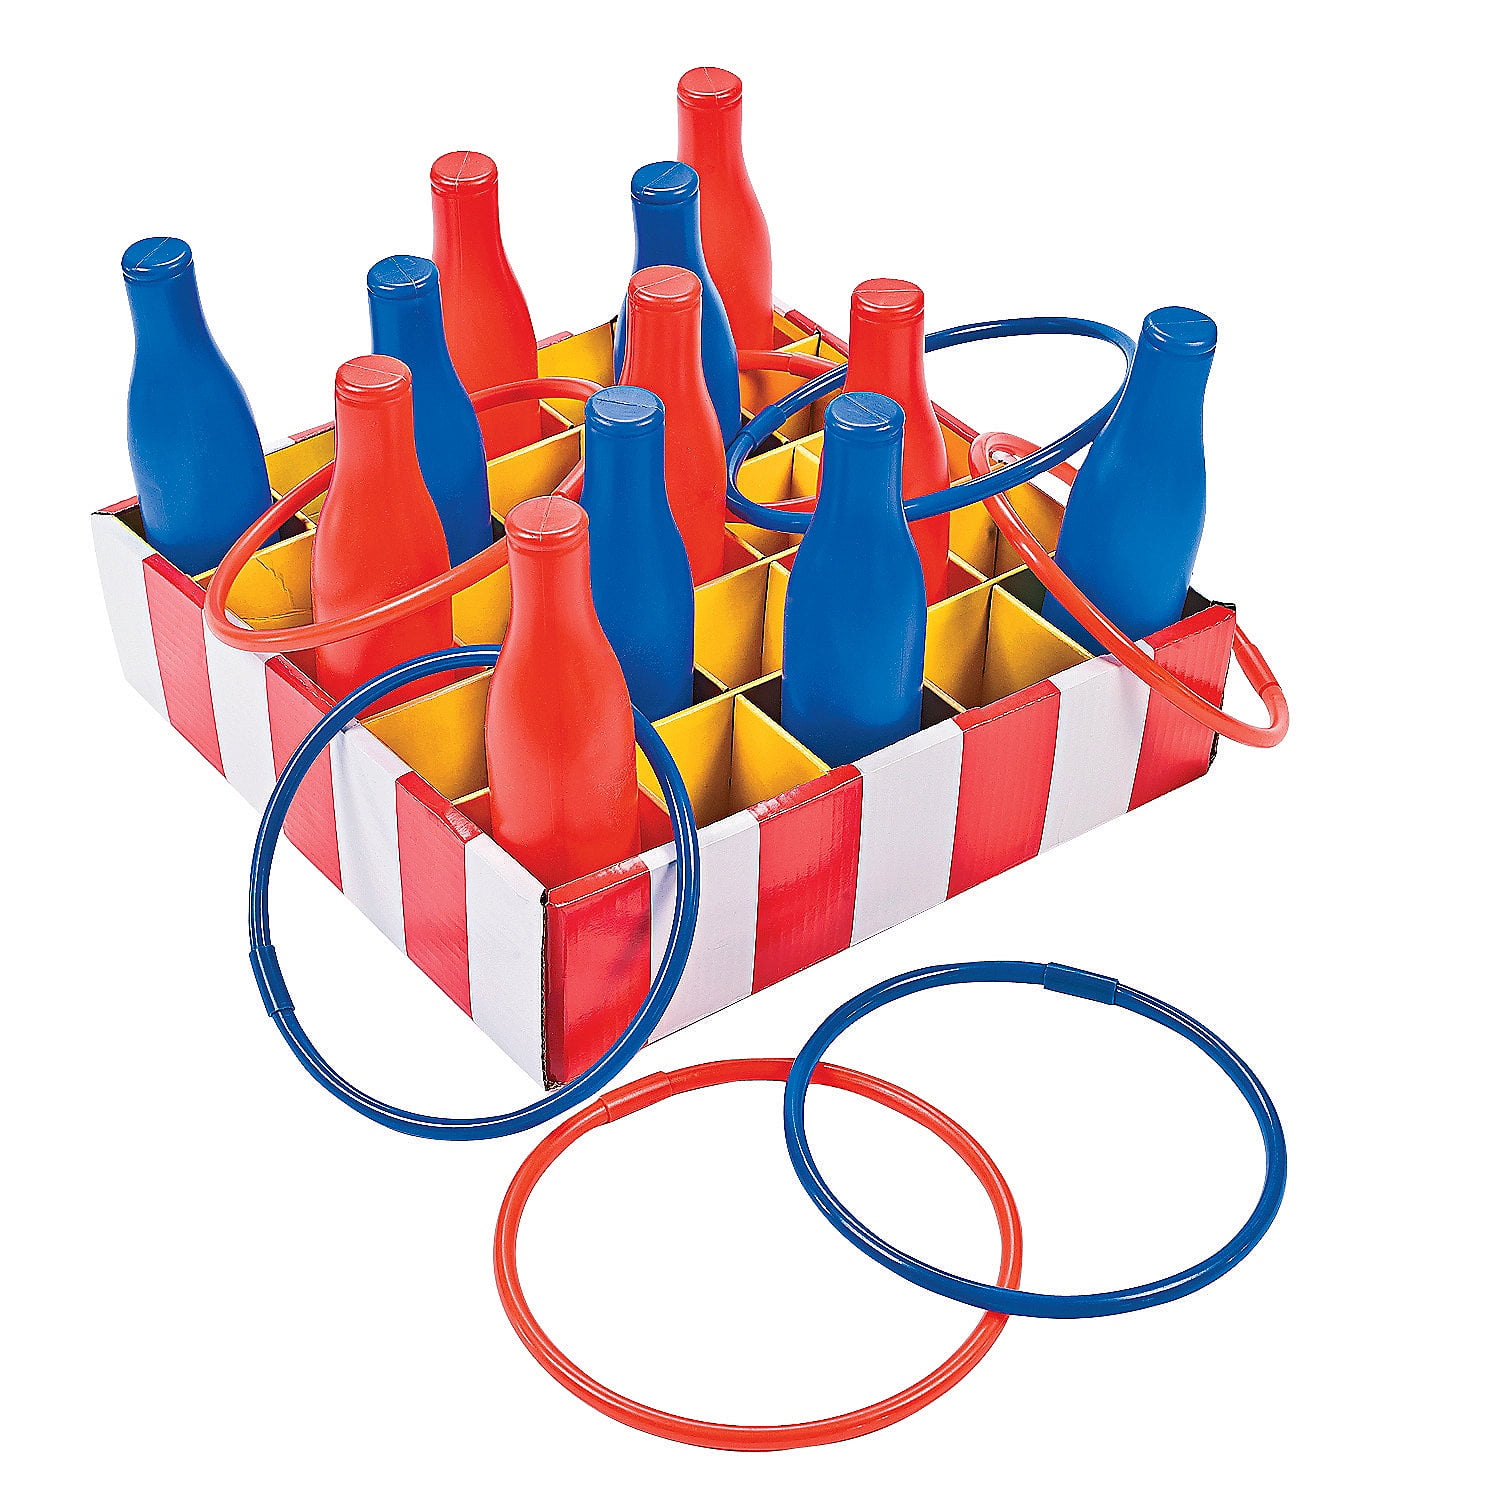 Carnival Ring Toss Game Set, Outdoor Games for Kids and Adults, Carnival  Birthday Party Supplies, Tossing Game Kit for Yard, Lawn, Beach and Camping  : Buy Online at Best Price in KSA -